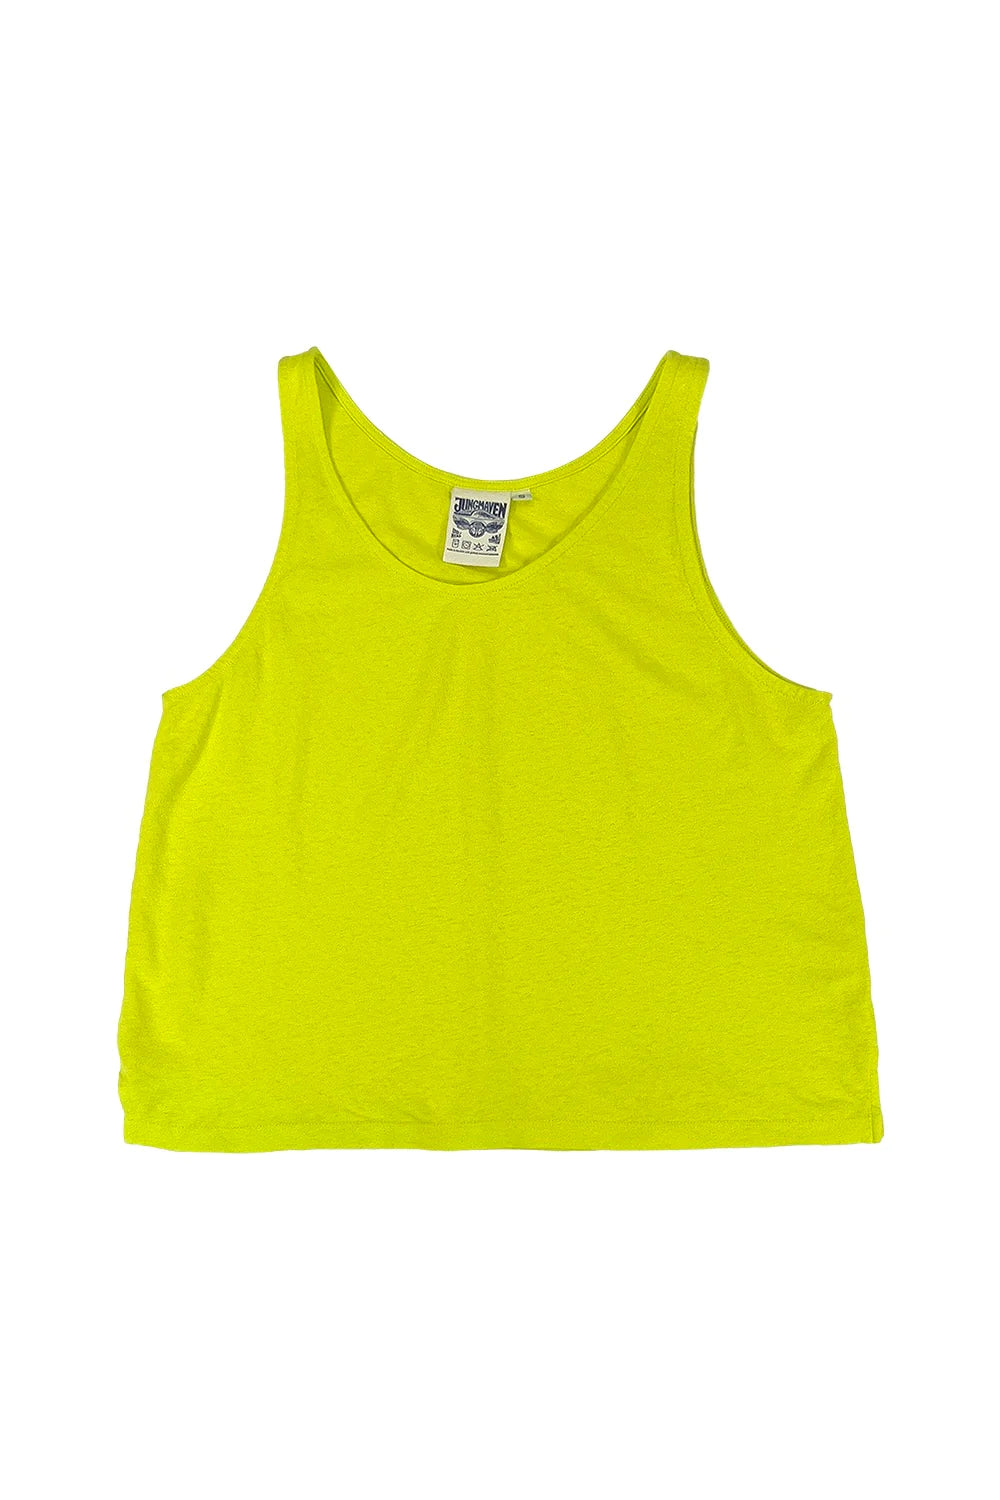 JUNGMAVEN CROPPED TANK - Limelight